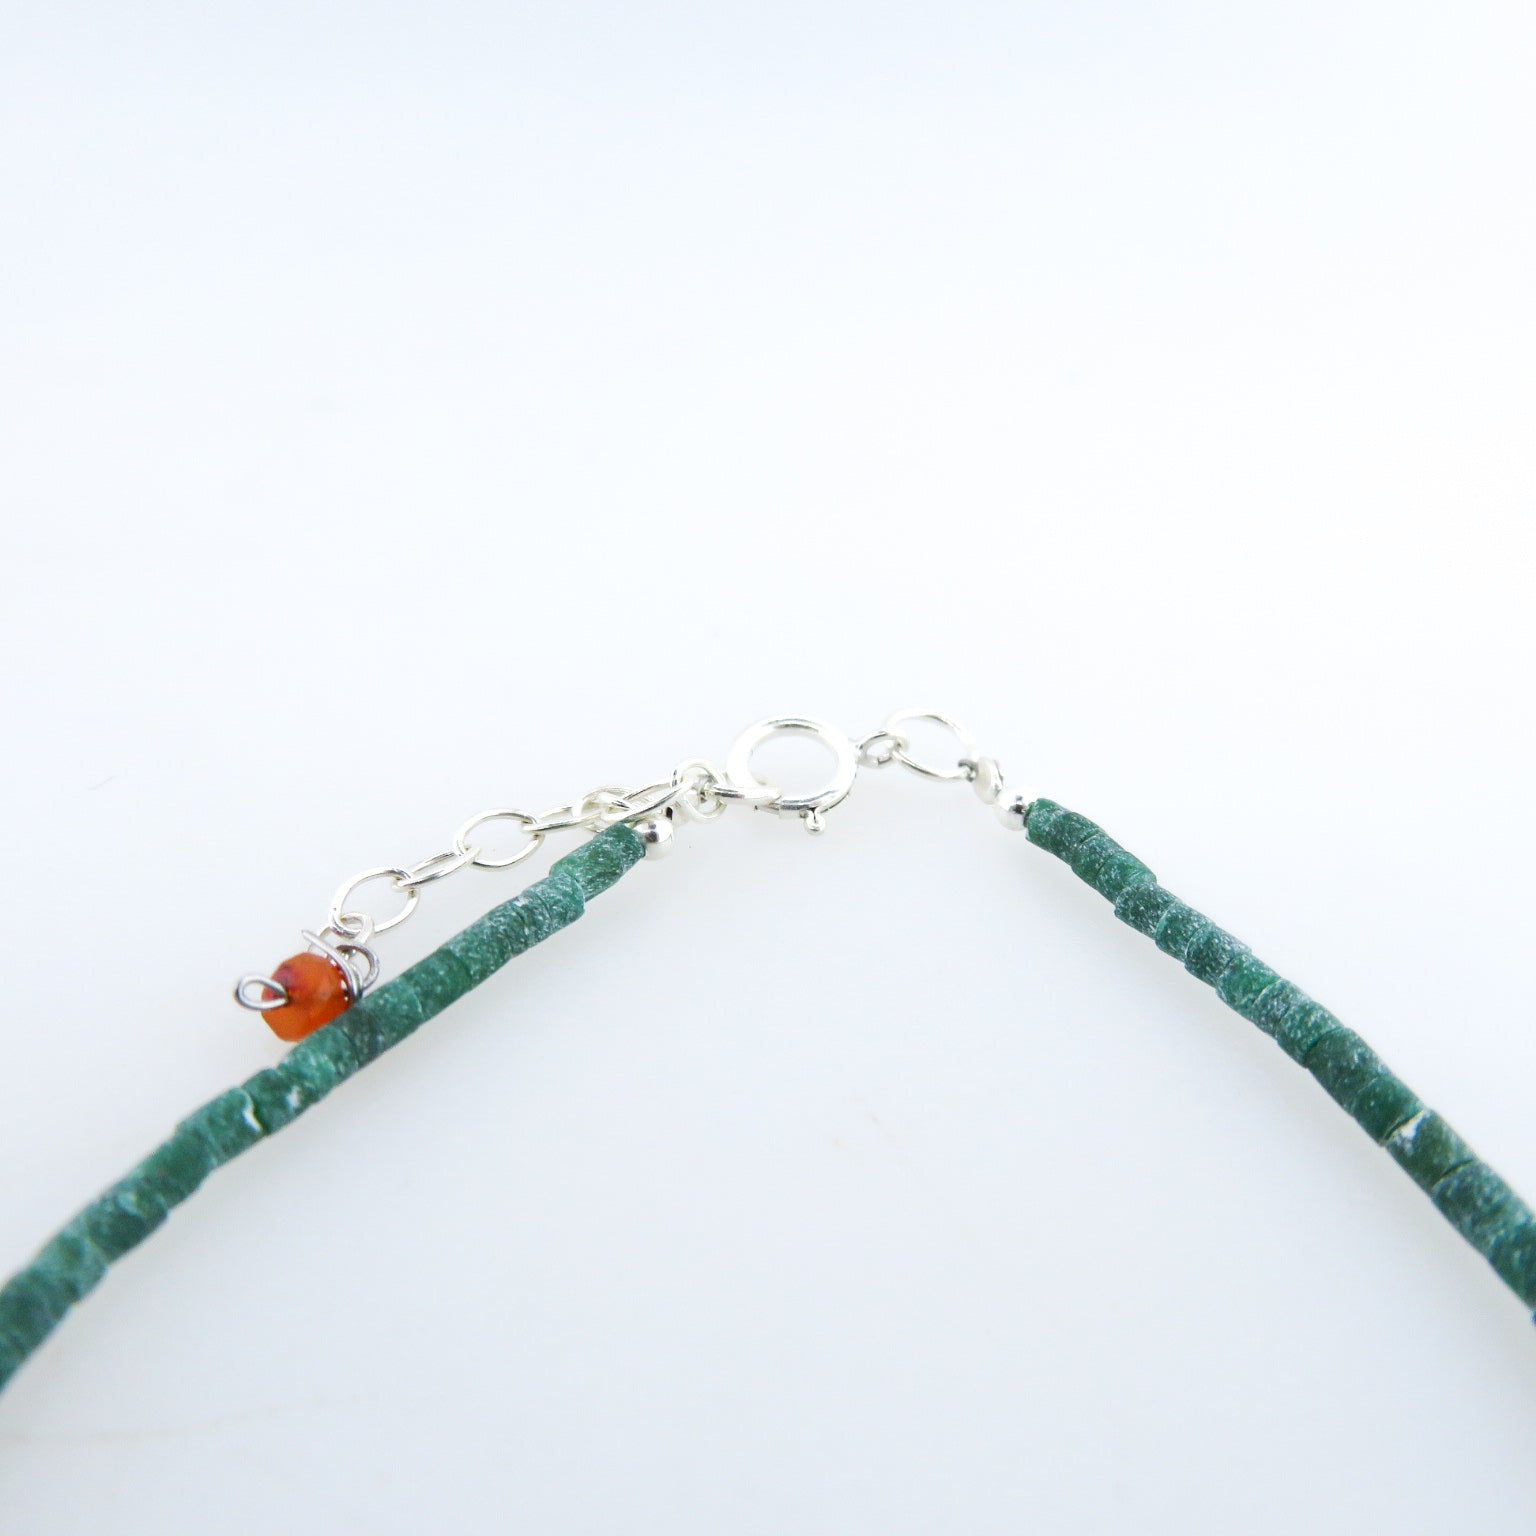 Emerald Bracelet with Carnelian, Black Onyx and Silver Beads